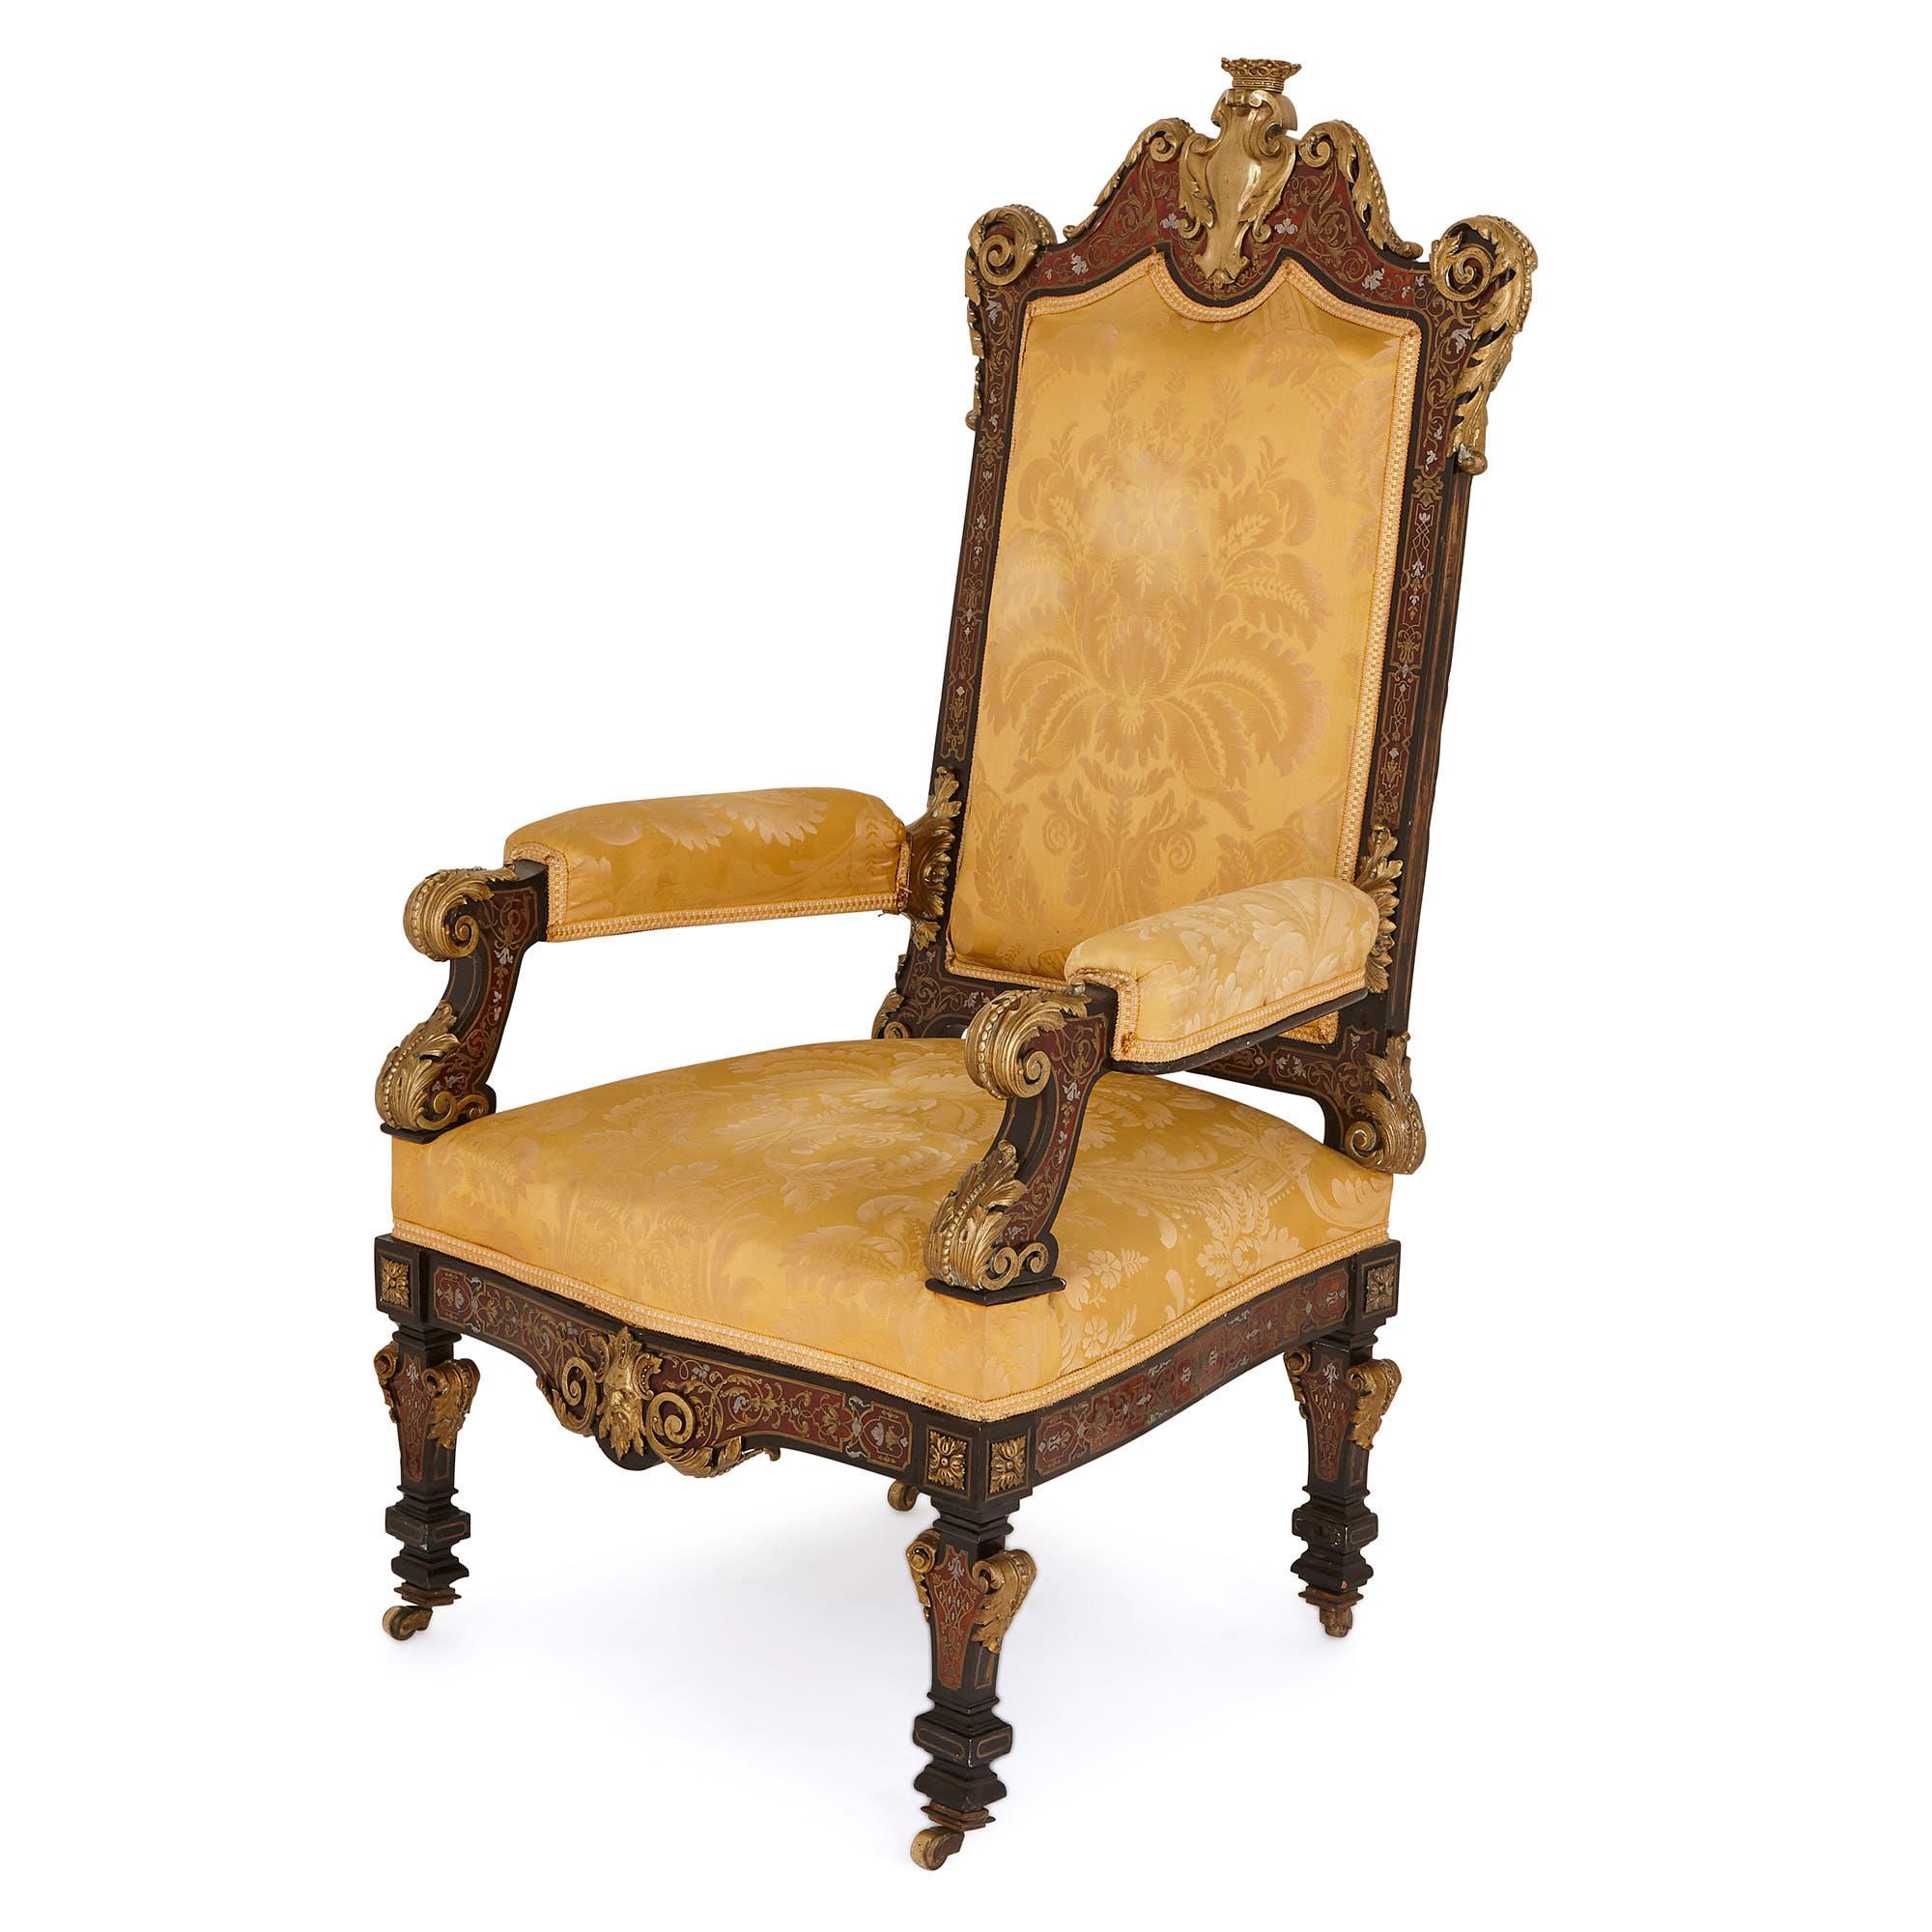 This magnificent armchair, or throne chair, is a majestic work of seated furniture, decorated to exacting standards in the highly detailed and complex Boulle technique. It is a rare and wonderful French antique, which should take pride of place in a